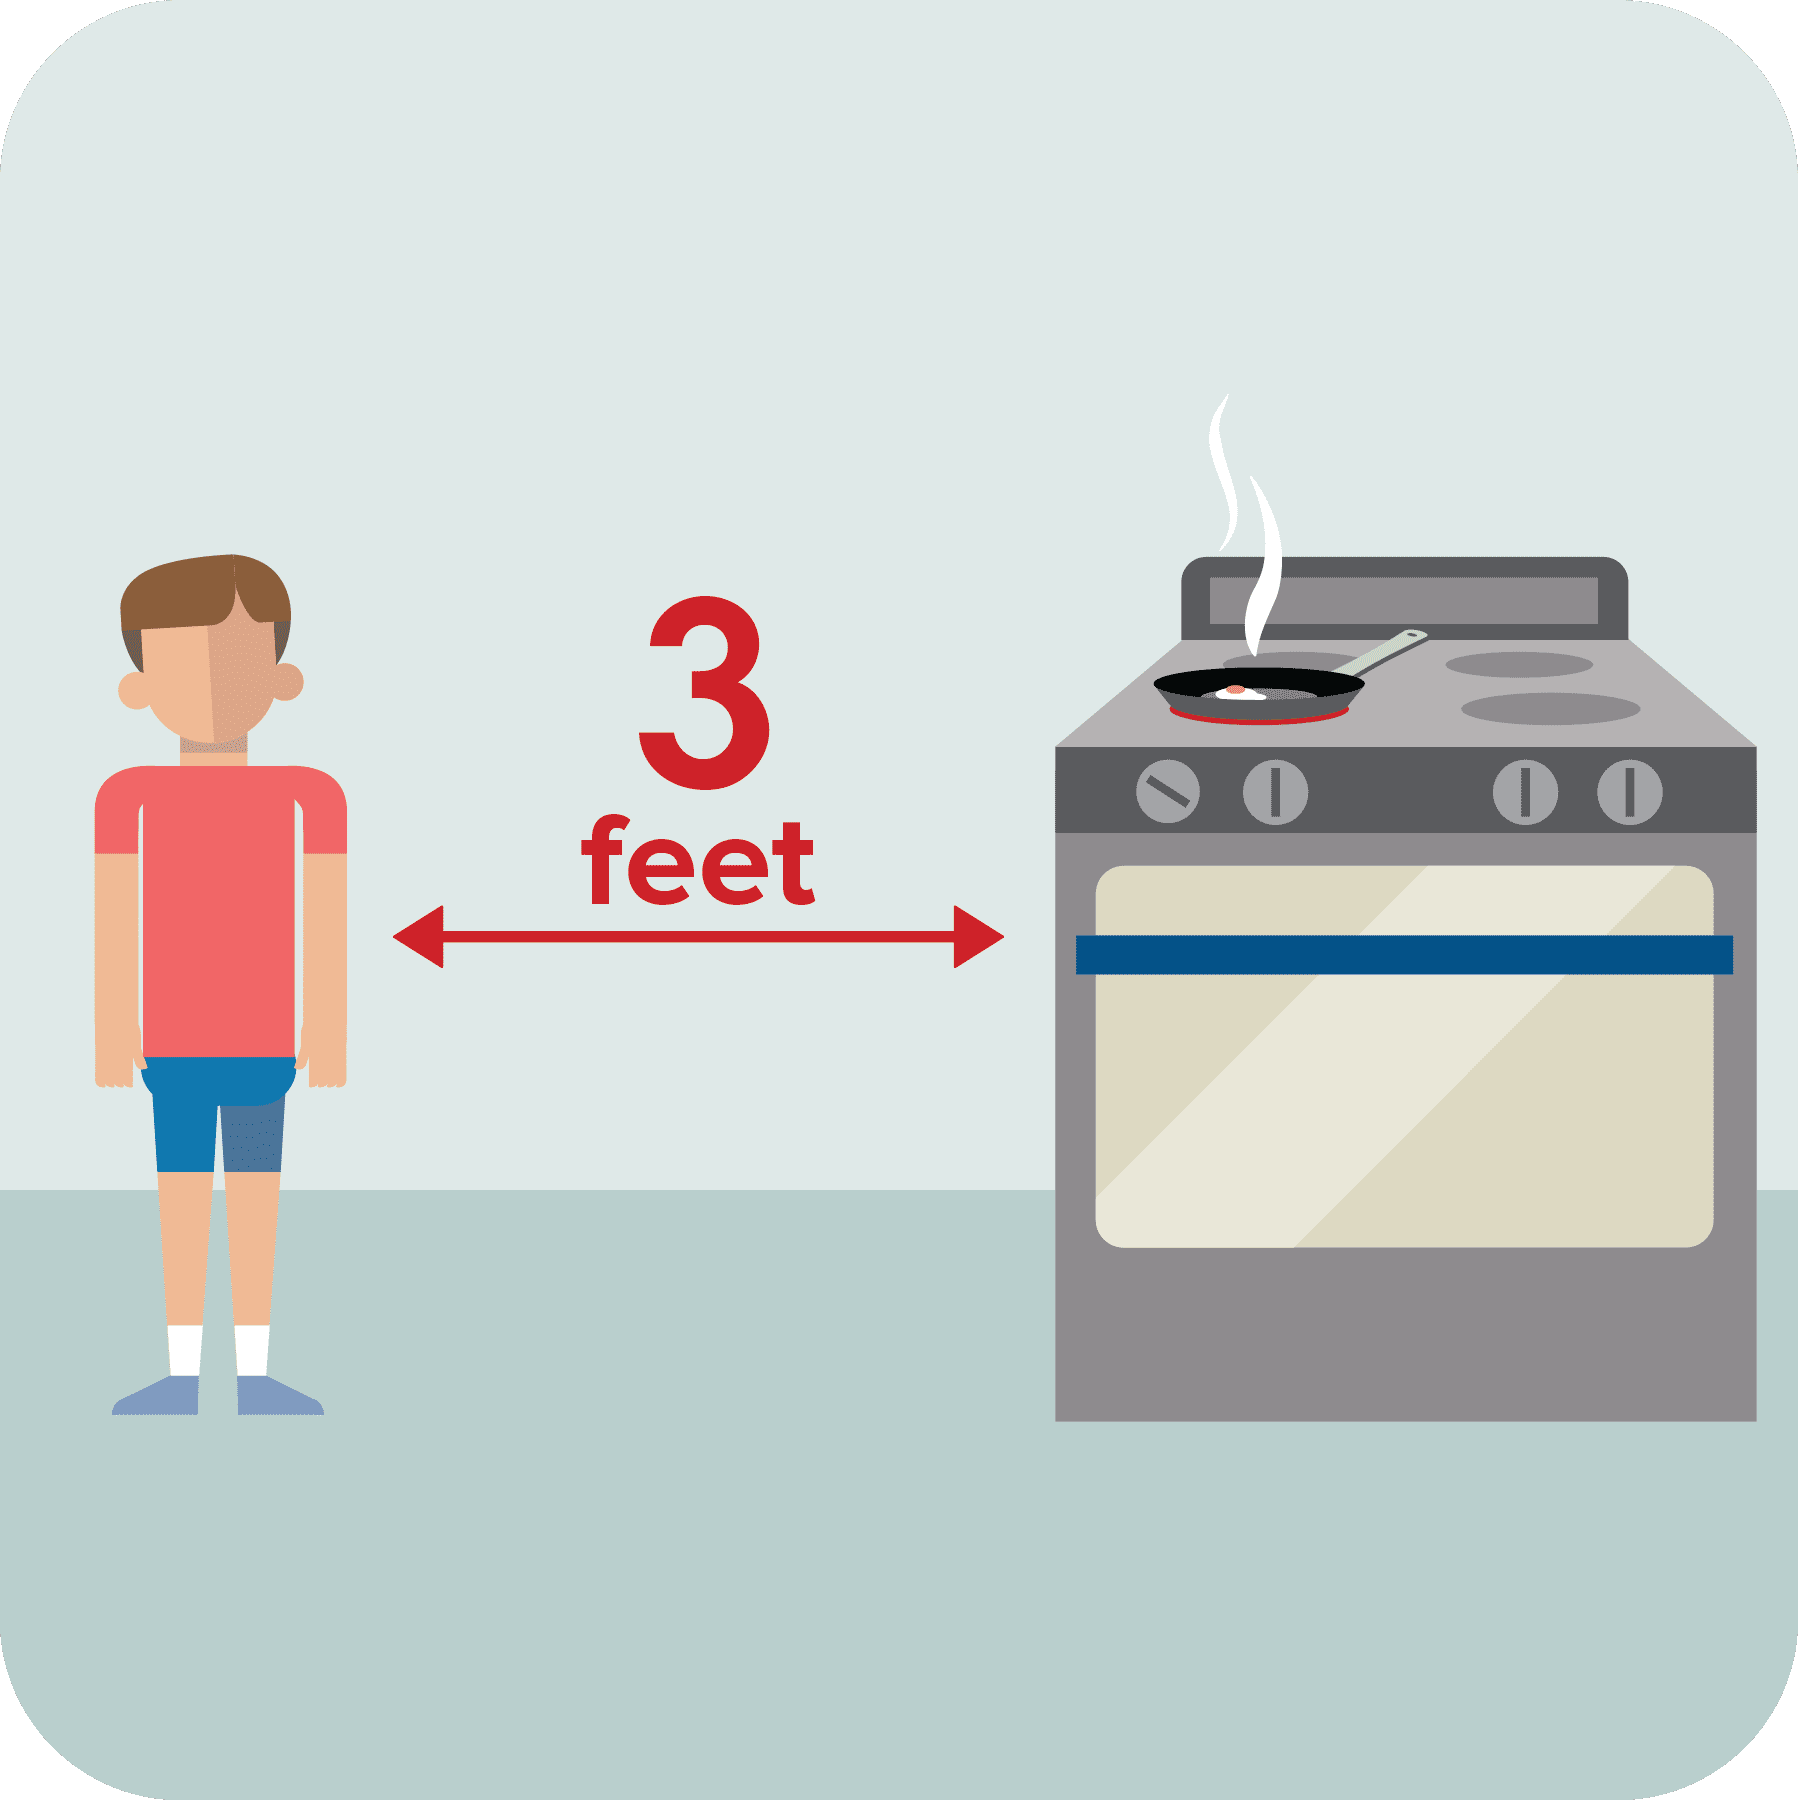 child 3 feet from stove